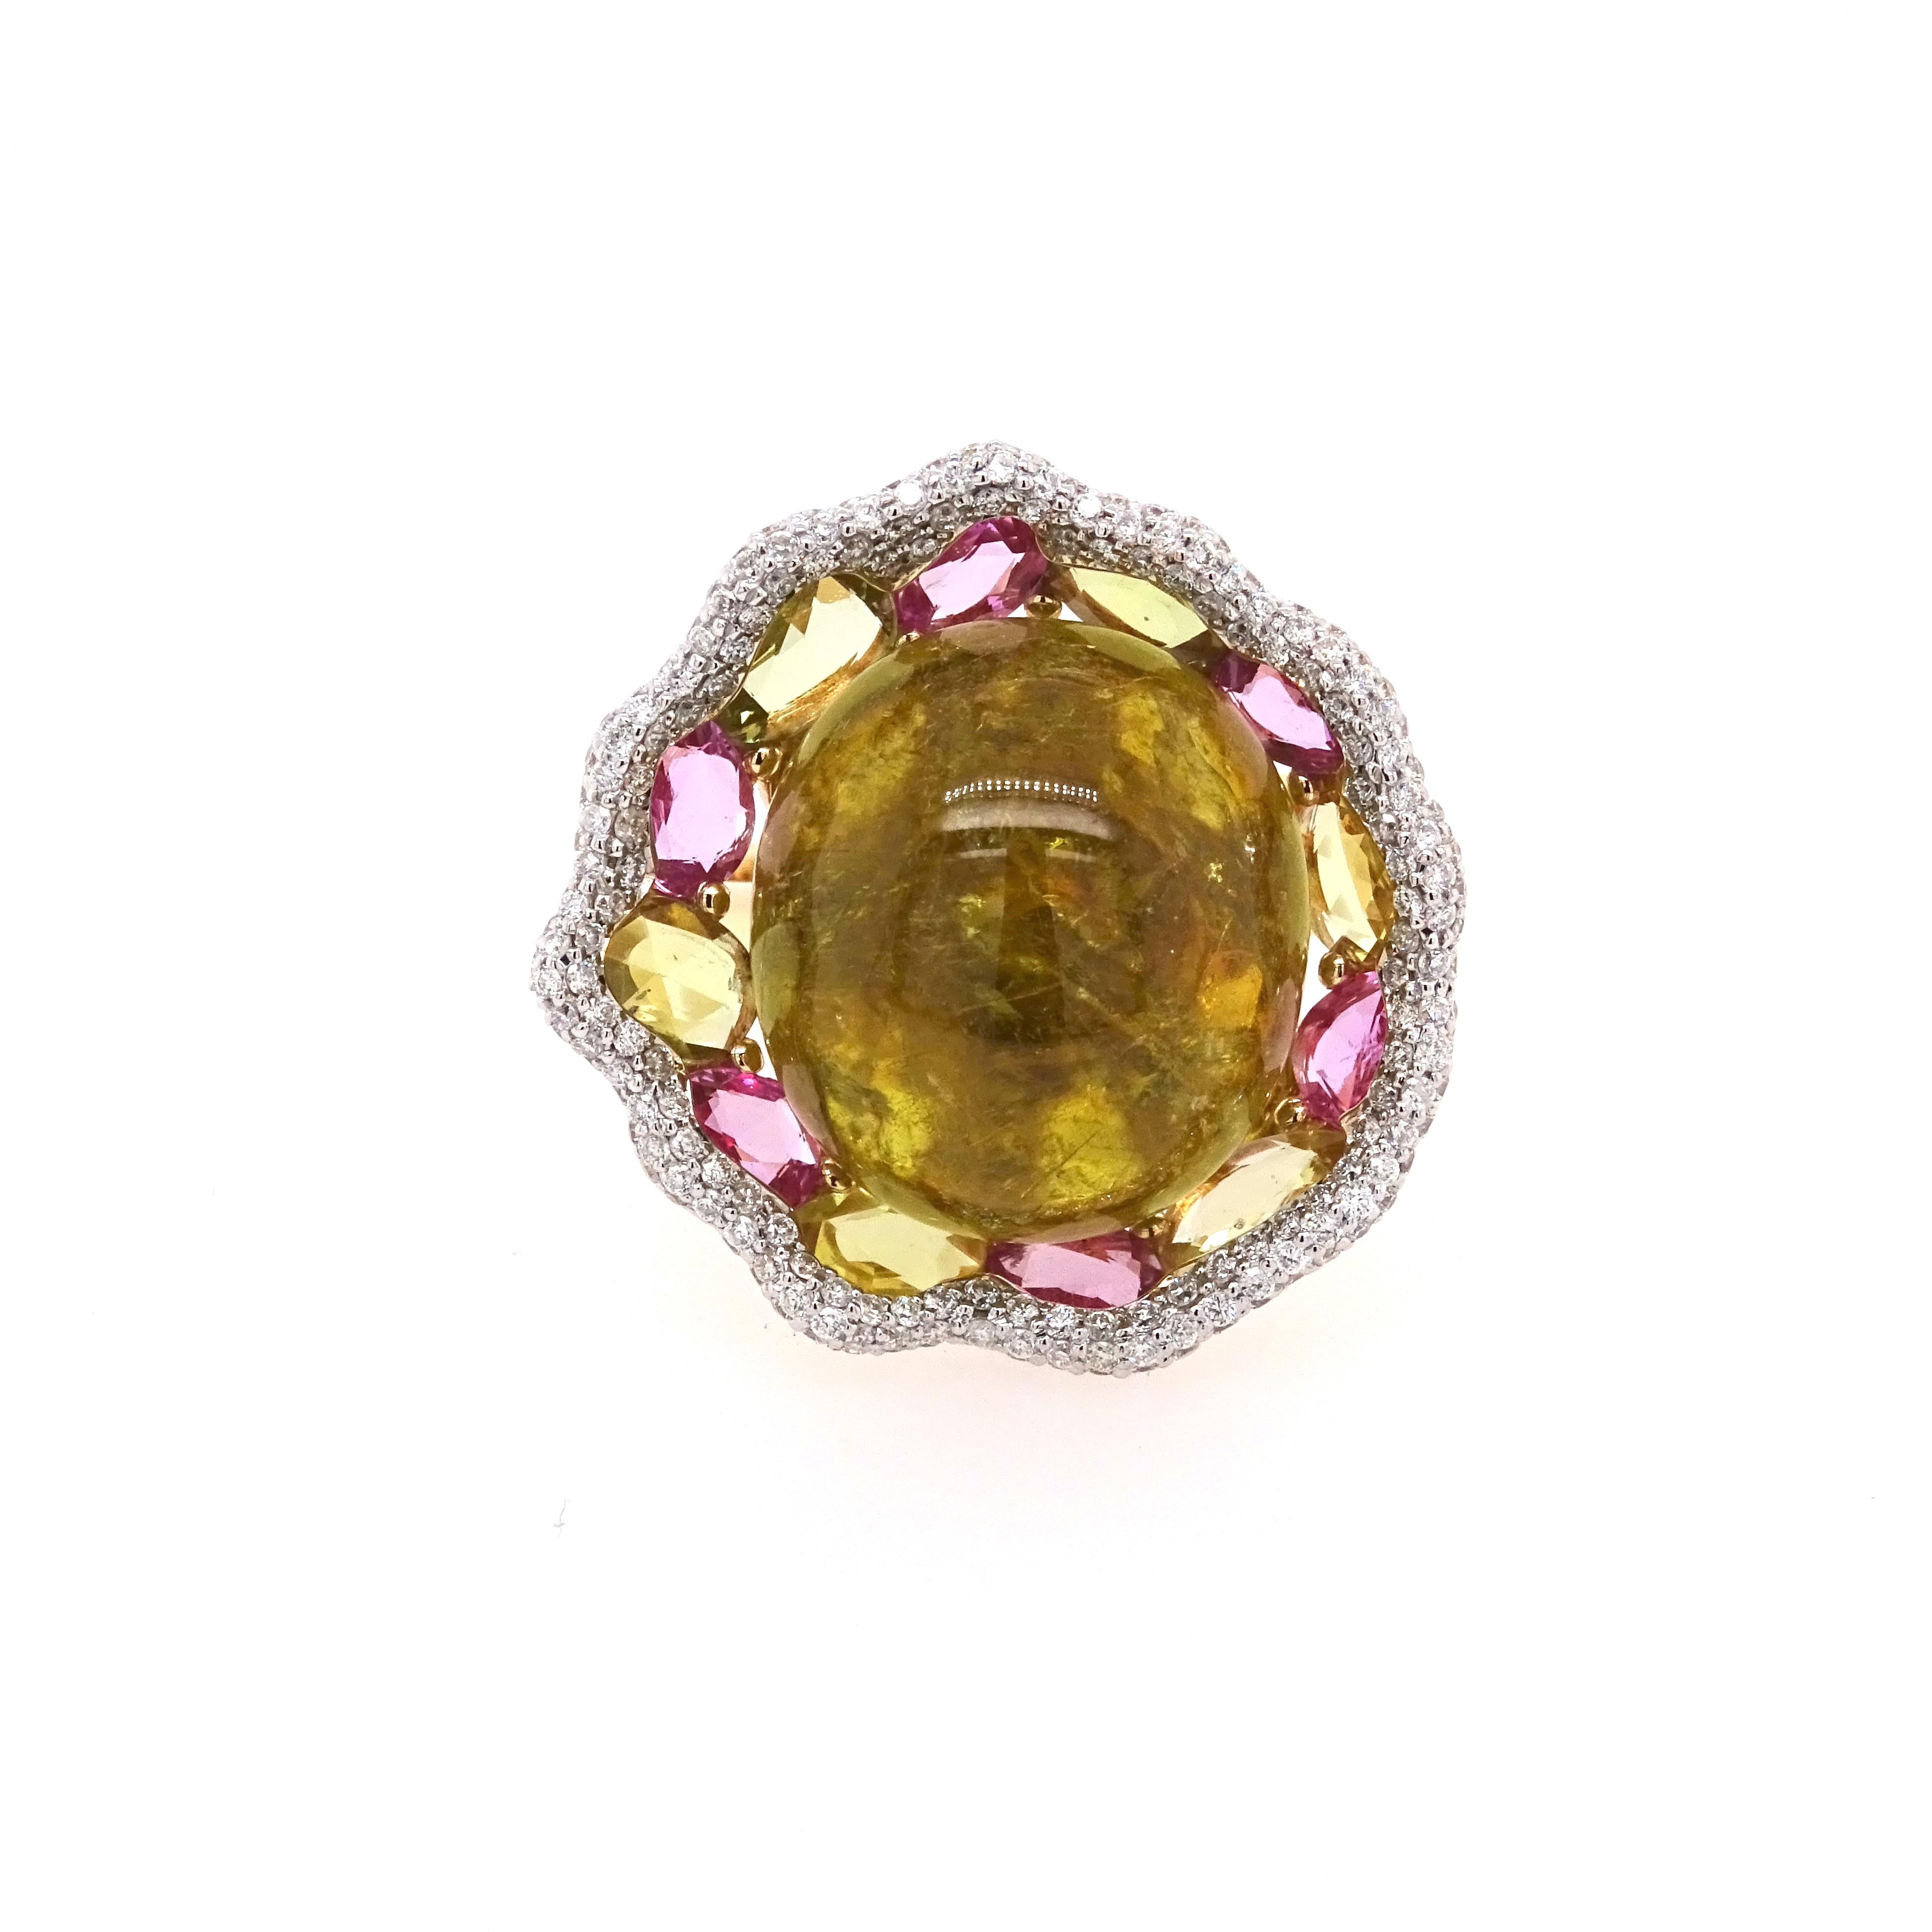 Immerse yourself in the captivating beauty of this designer ring by VOTIVE, where a vibrant yellow/green tourmaline cabochon takes center stage. Embraced by a stunning array of faceted, unevenly shaped sapphires in enchanting green and pink hues,